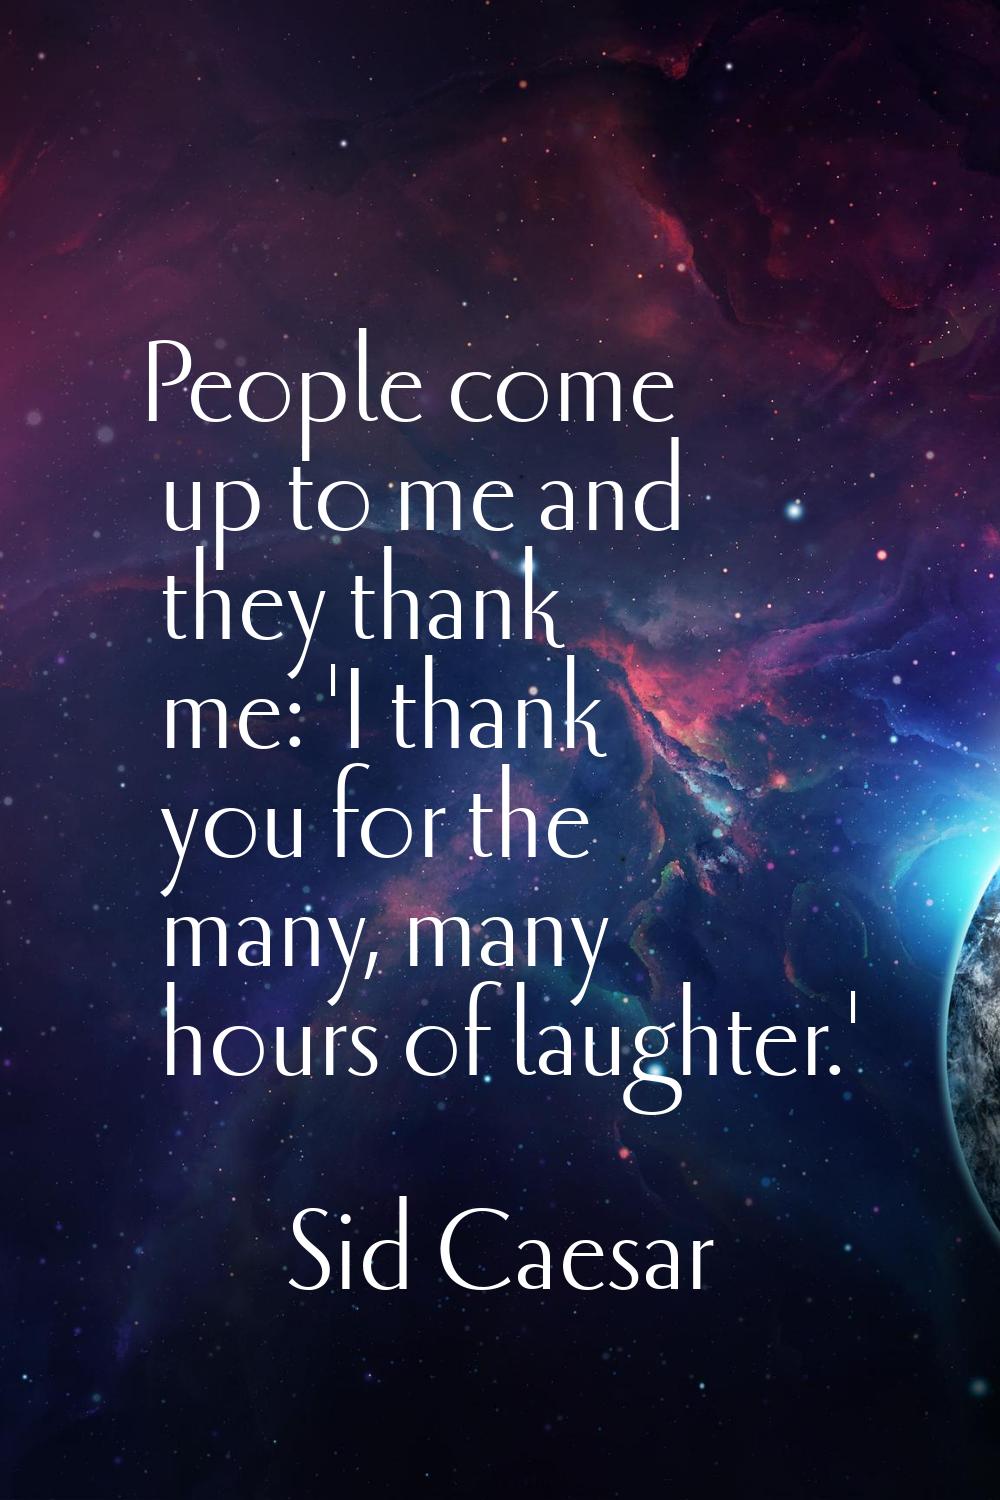 People come up to me and they thank me: 'I thank you for the many, many hours of laughter.'